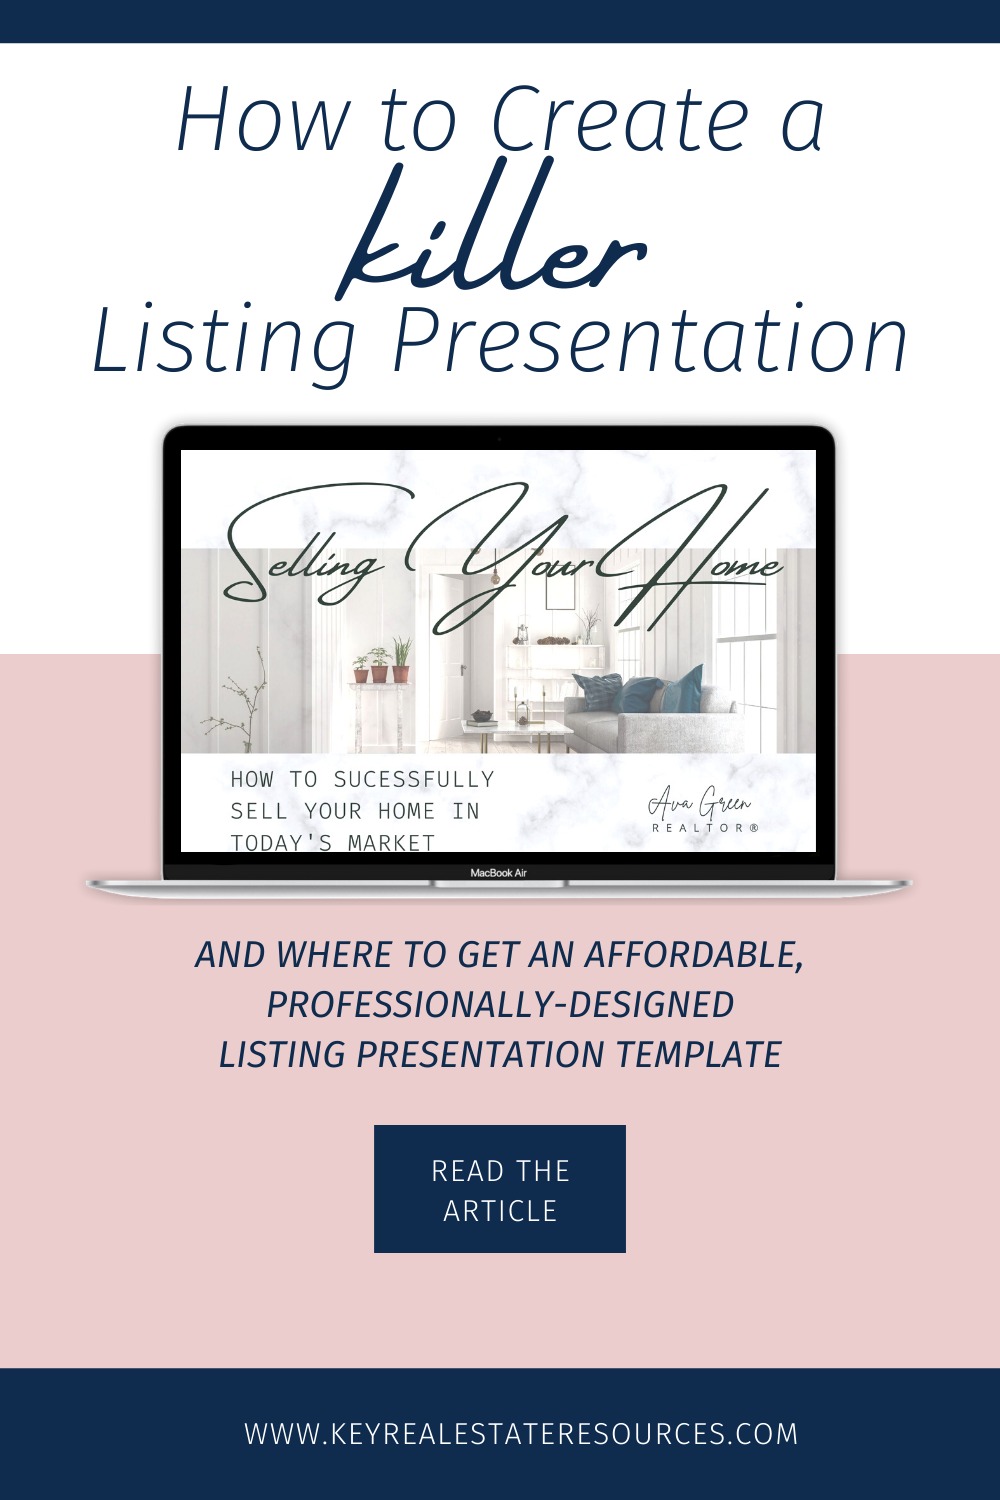 before making a listing presentation an agent should